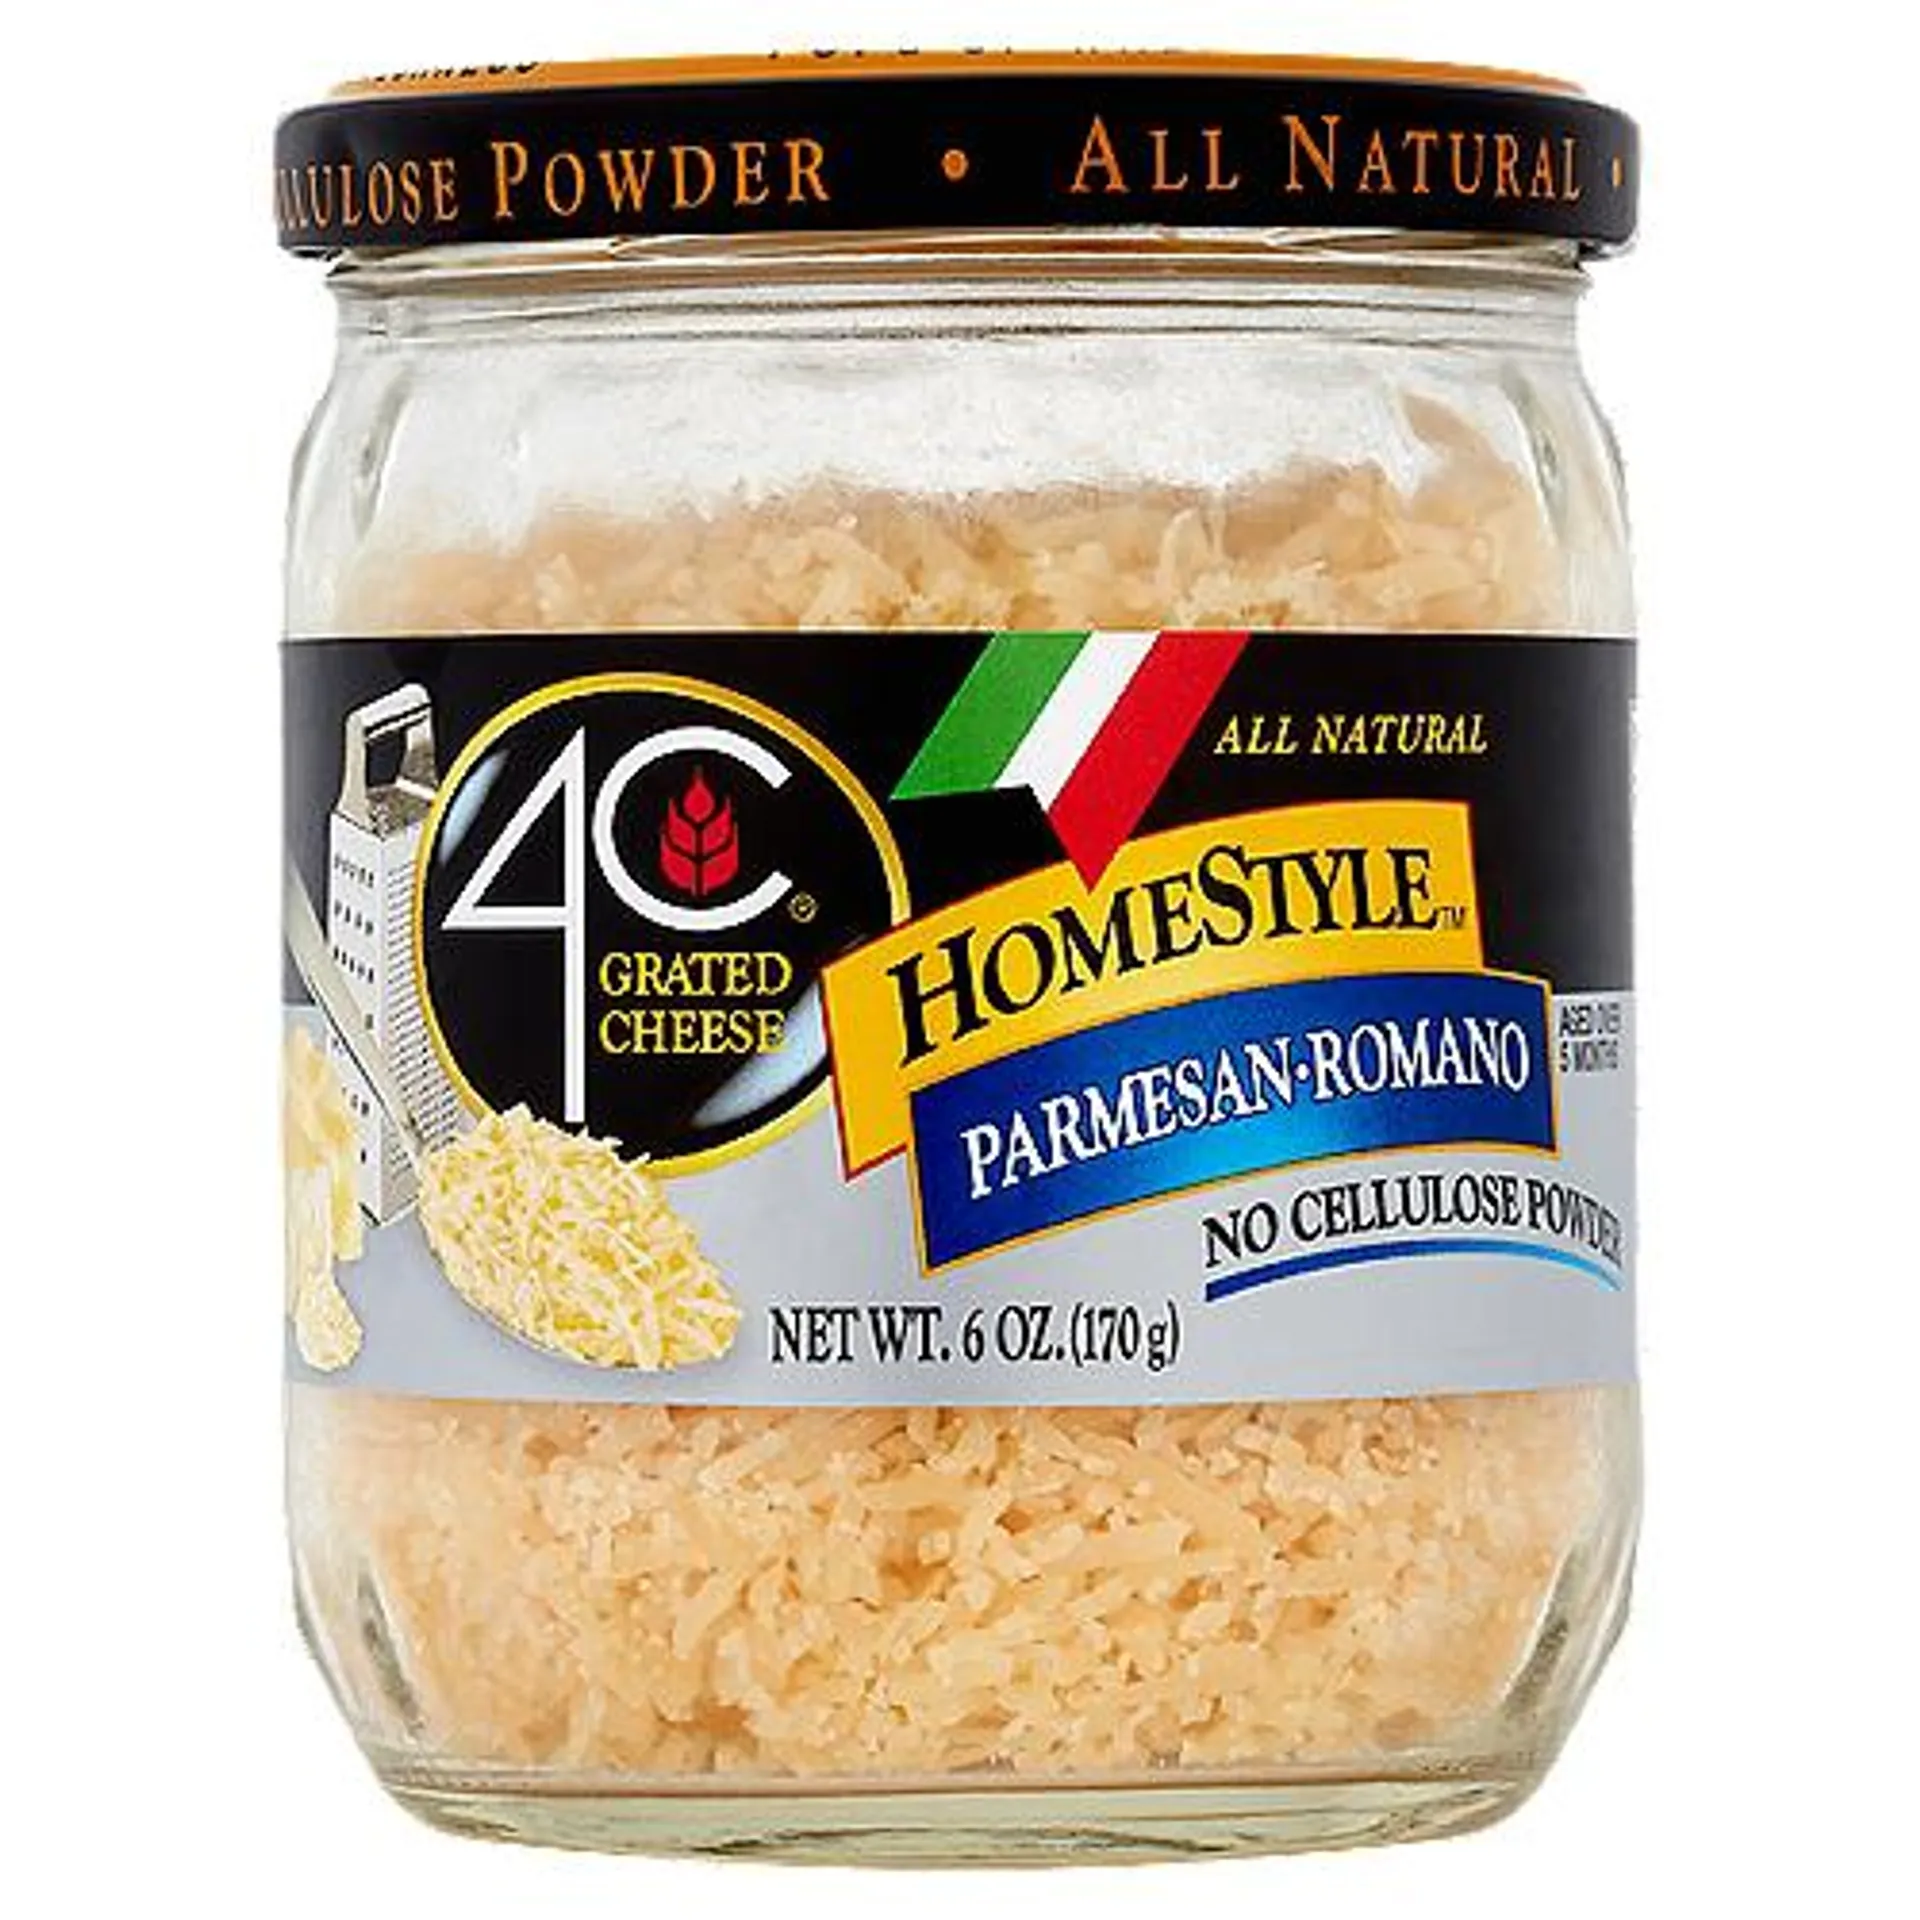 4C HomeStyle Parmesan-Romano, Grated Cheese, 6 Ounce